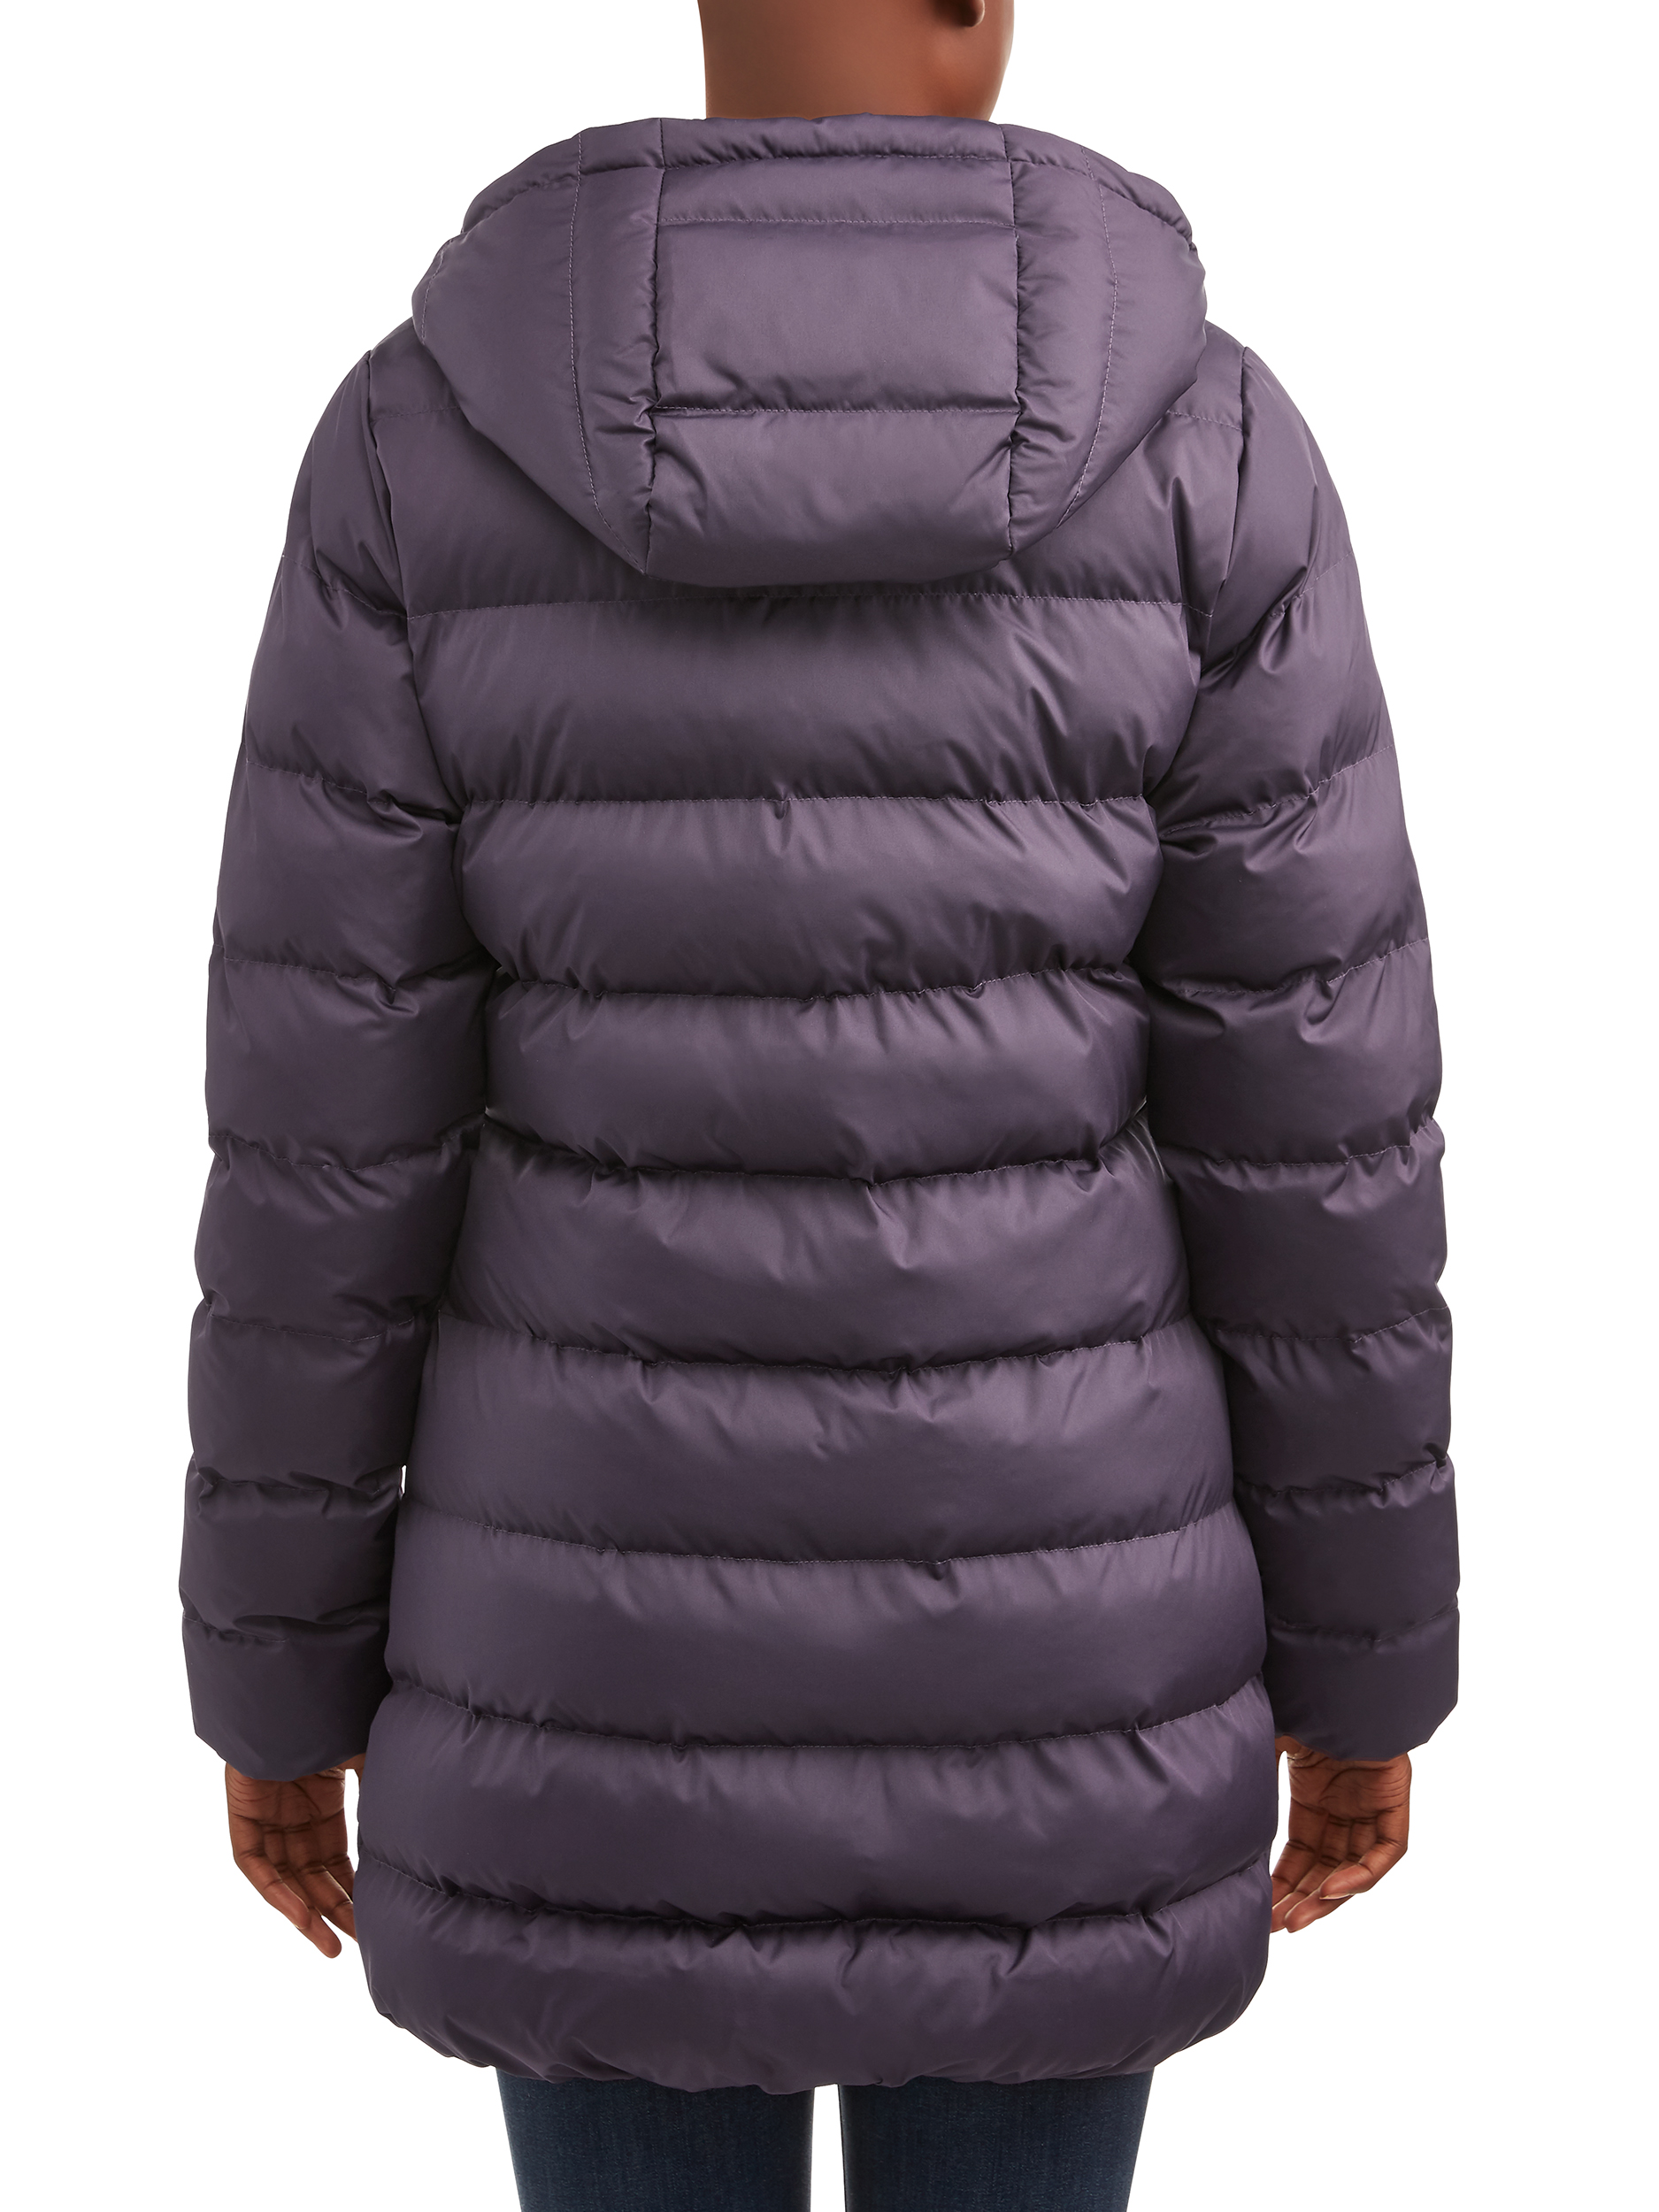 Iceburg Women's Long Insulated Parka - image 4 of 4